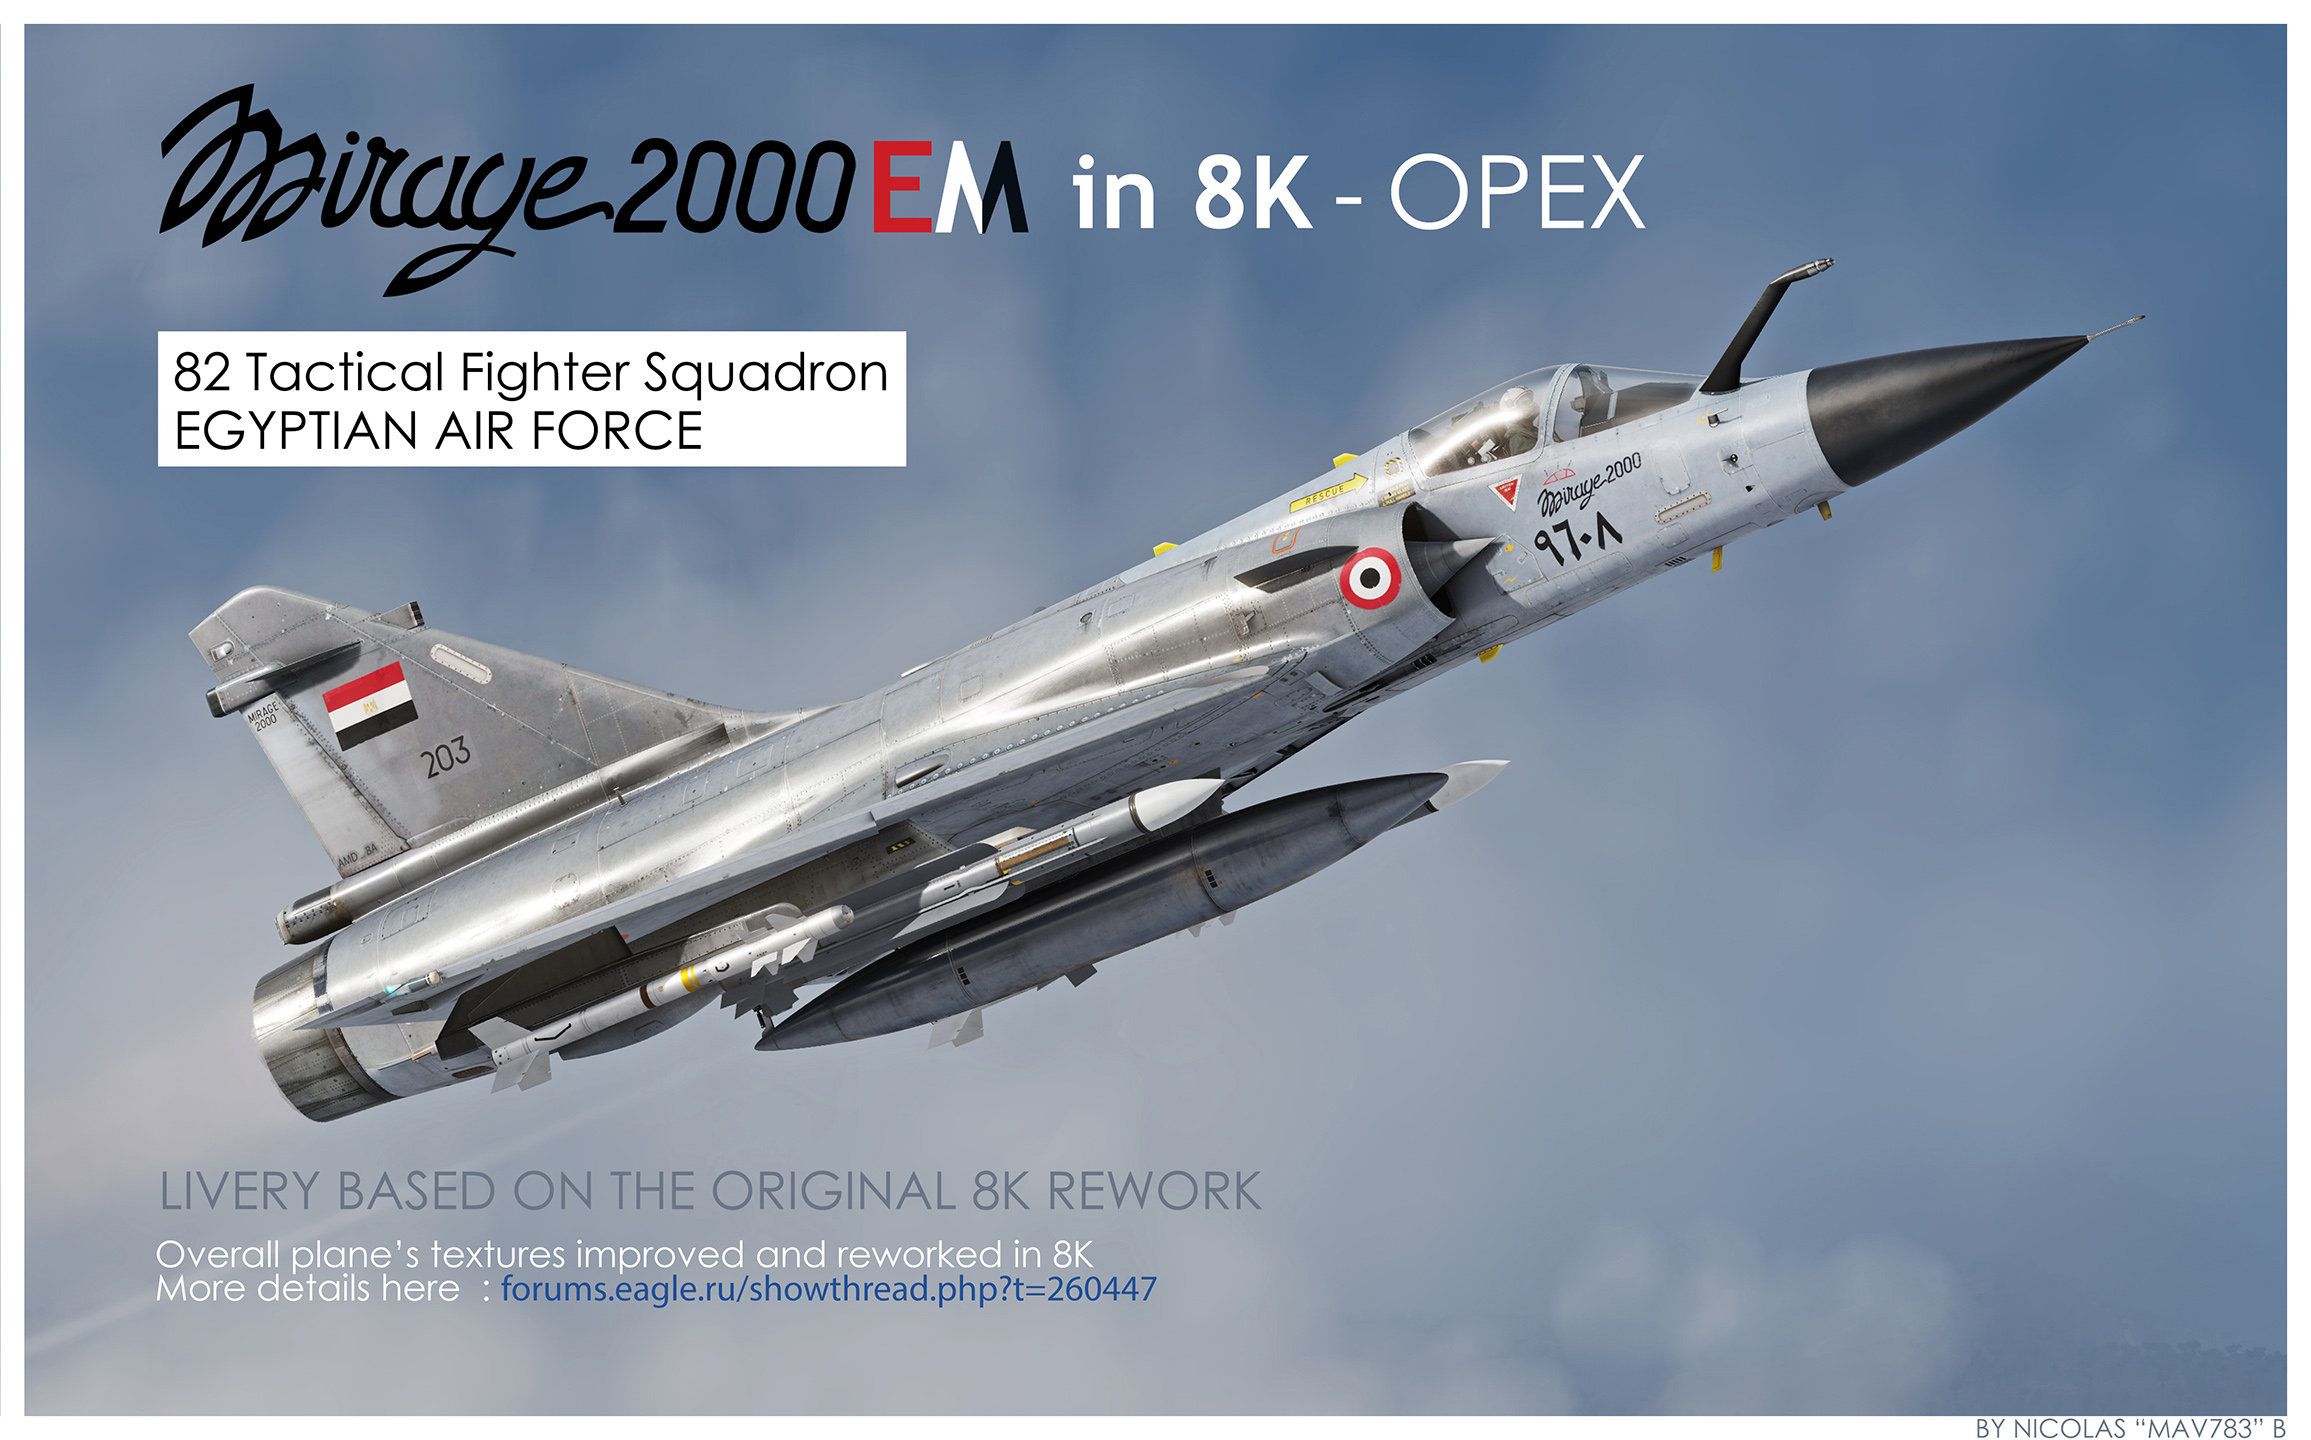 Egyptian Mirage 2000 EM (based on the "Mirage Reworked in 8K OPEX") - Updated v1.1